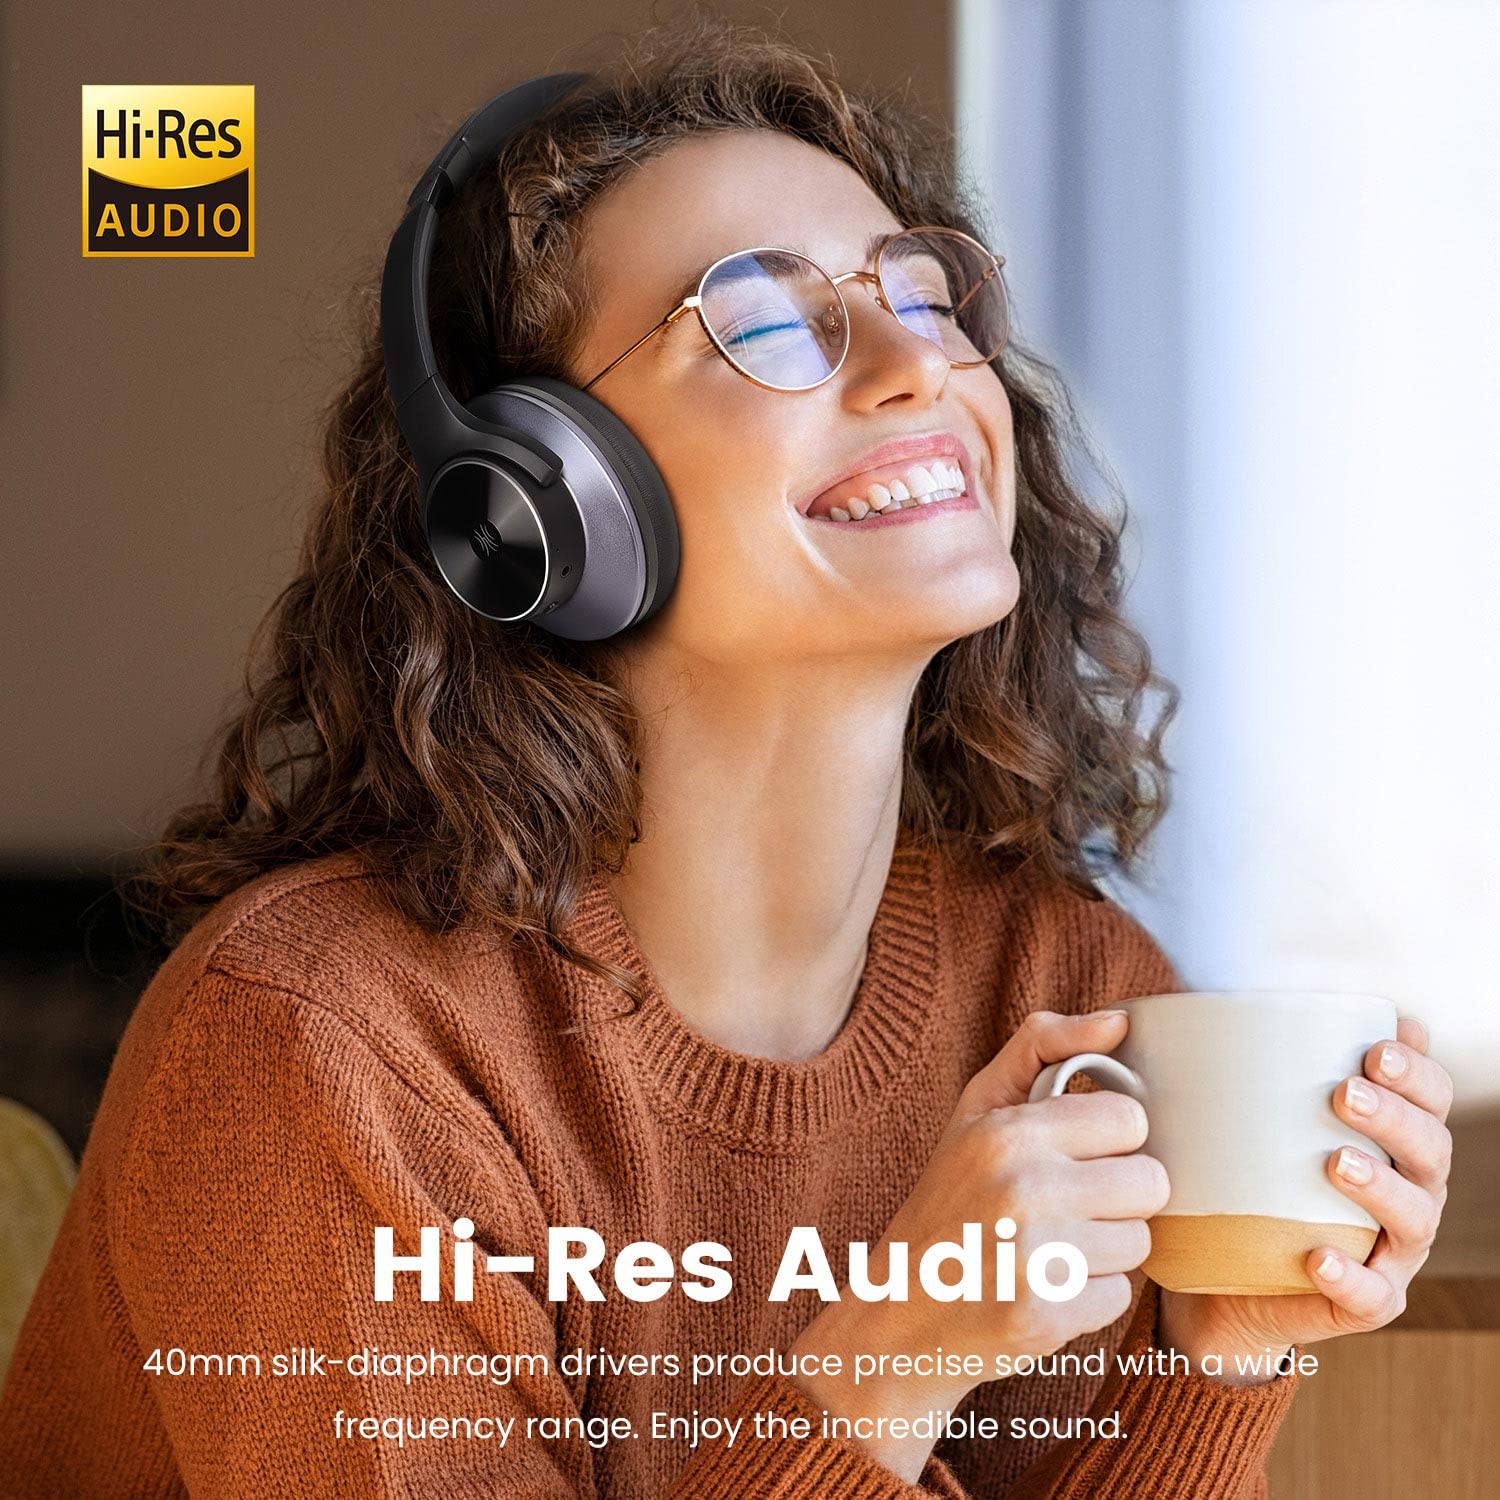 A10 Hybrid Active Noise Cancelling Bluetooth Wireless Over-Ear Headphones with Hi-Res Audio Sound, Deep Bass for Travel Home Office